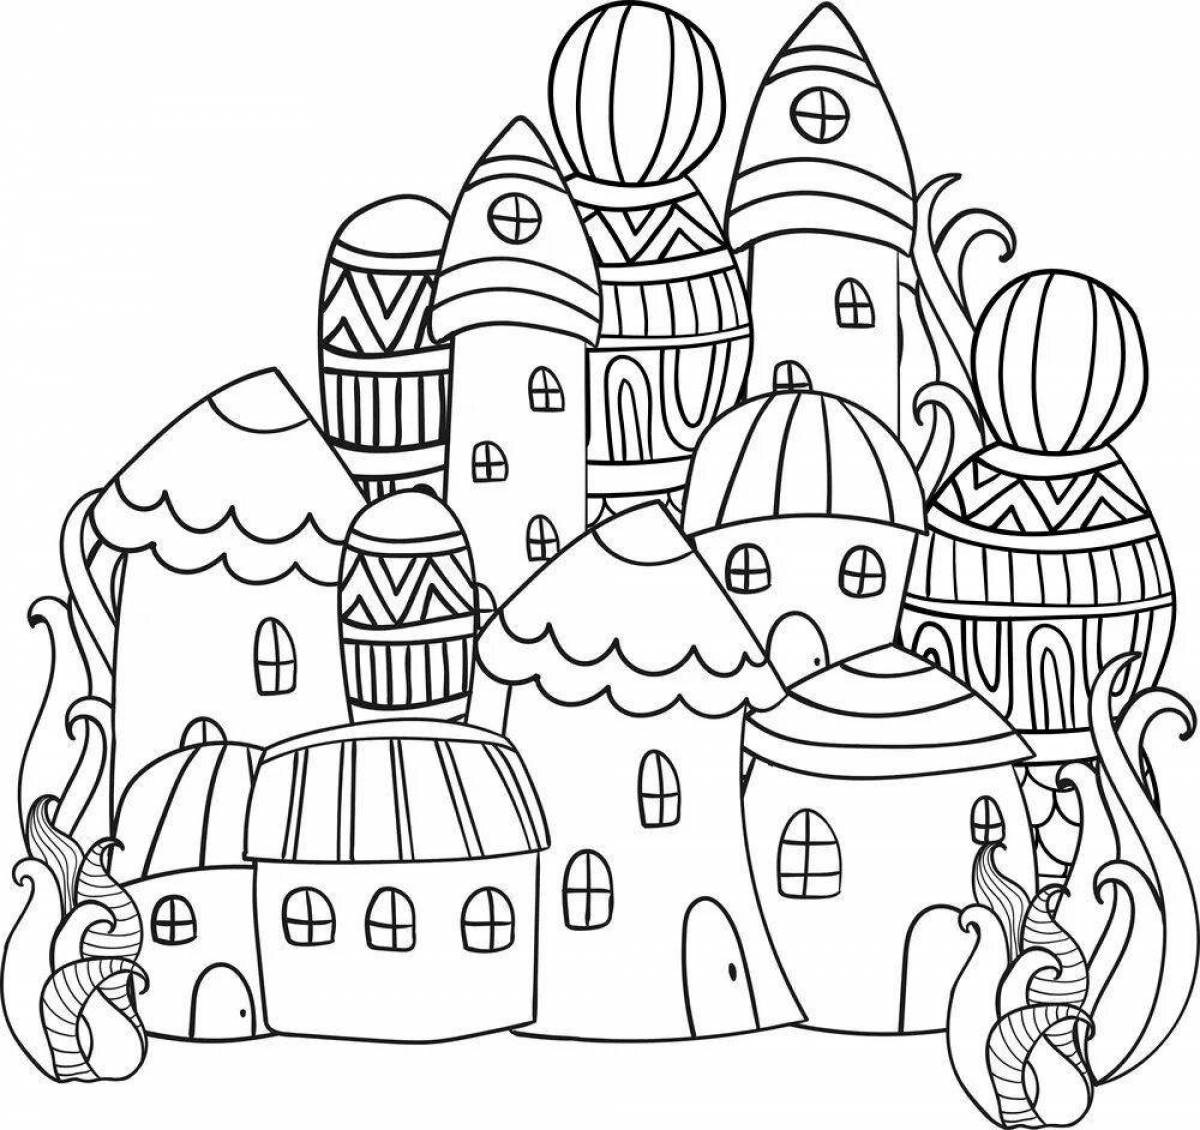 Fabulous city coloring book for kids